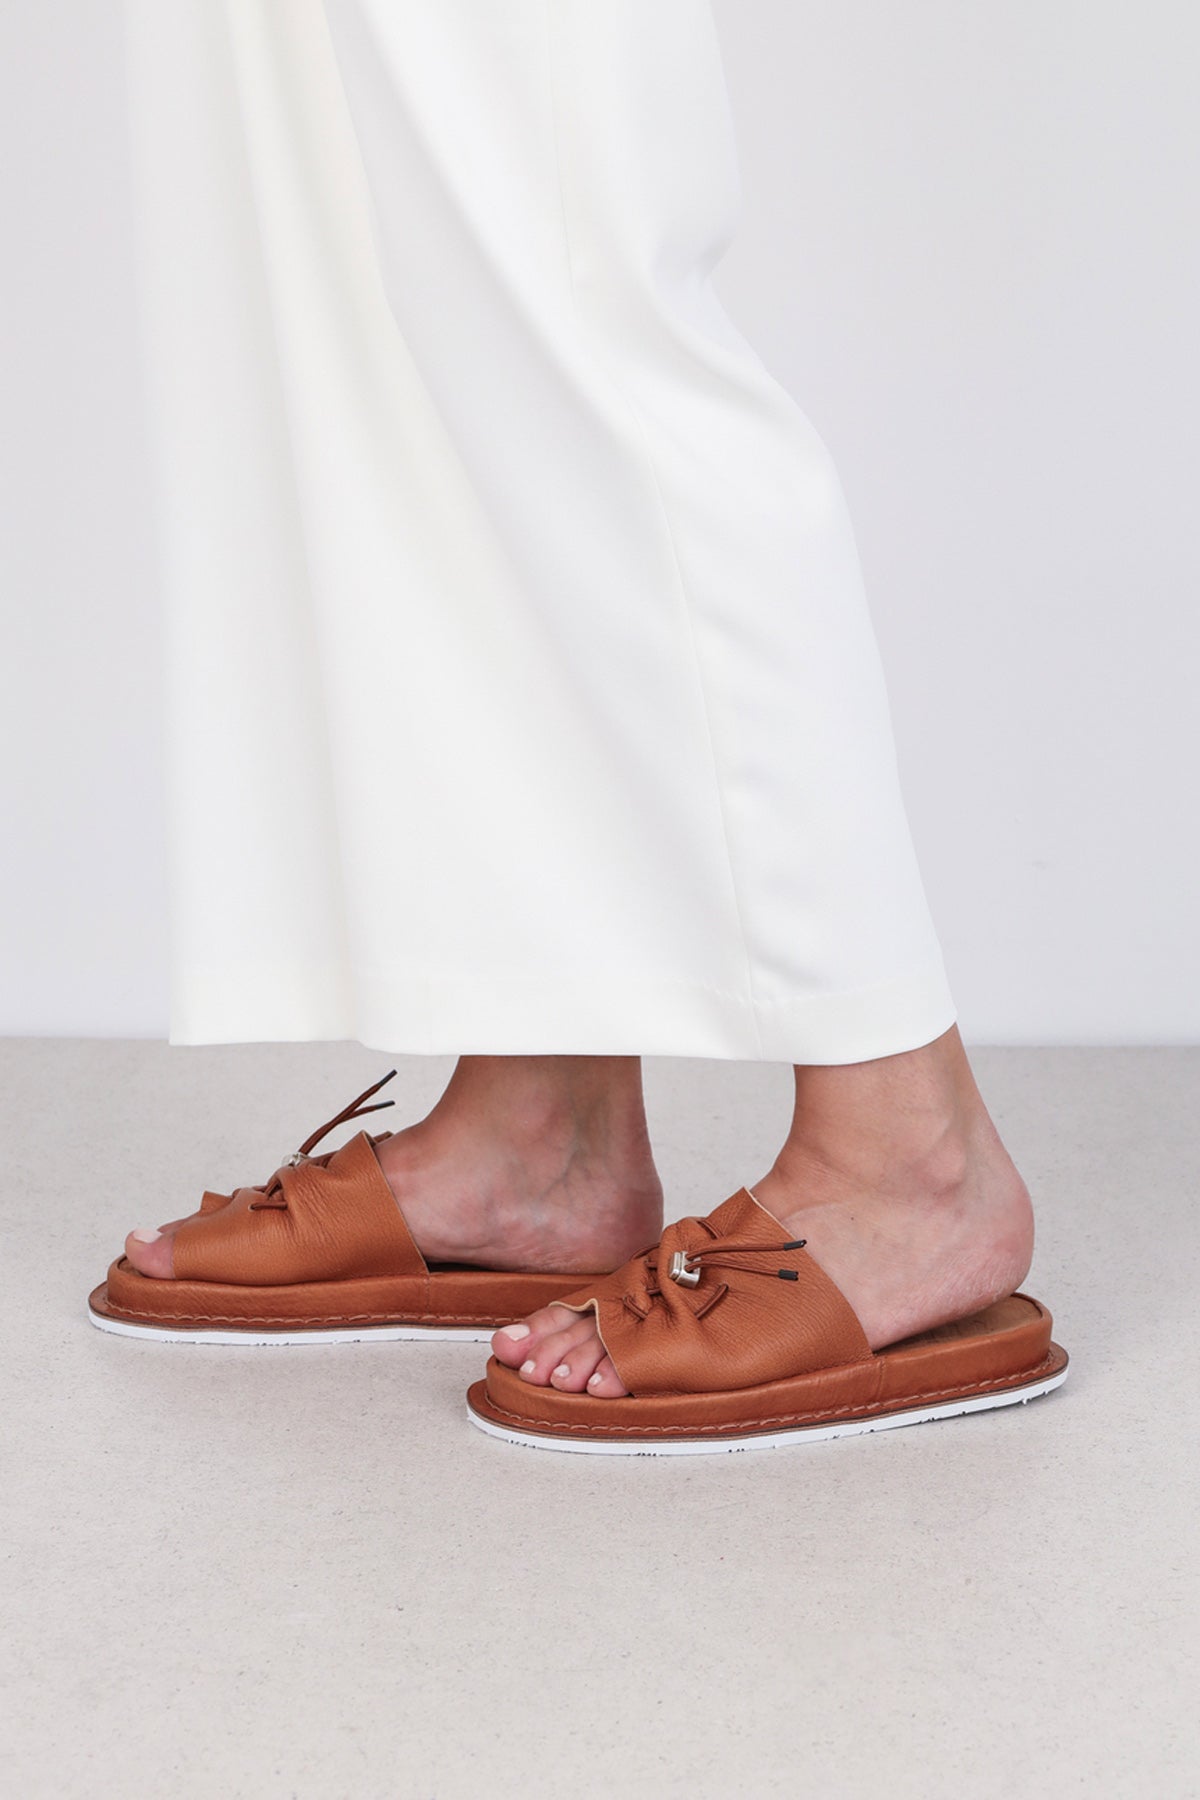 Trippen Synergy Sandal | Cuoio